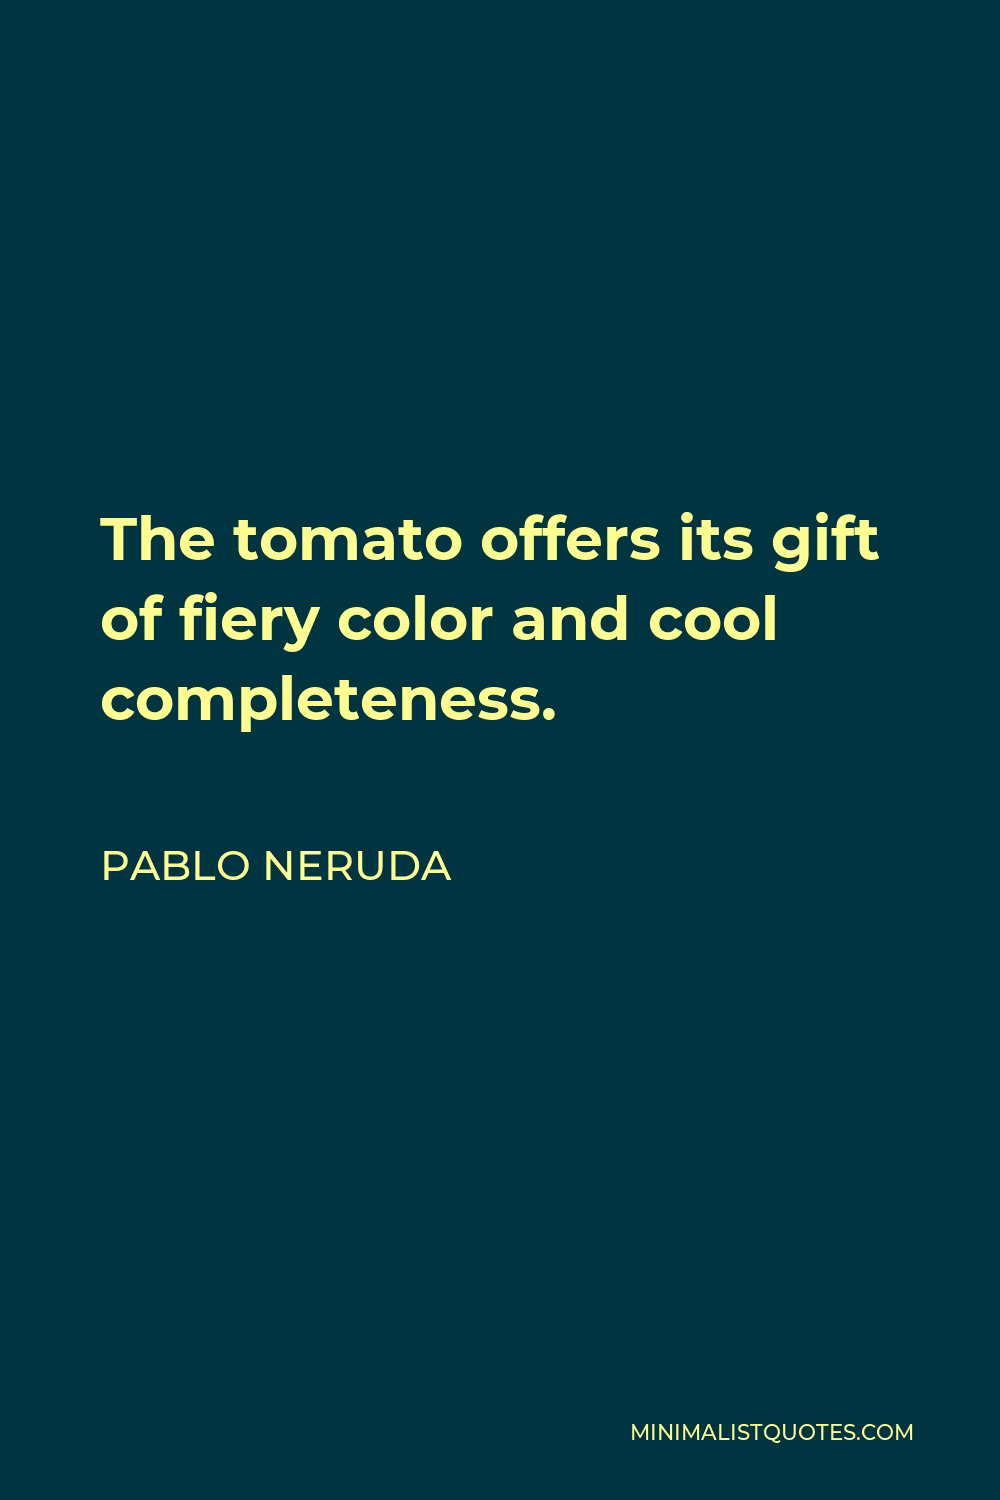 Pablo Neruda Quote - The tomato offers its gift of fiery color and cool completeness.